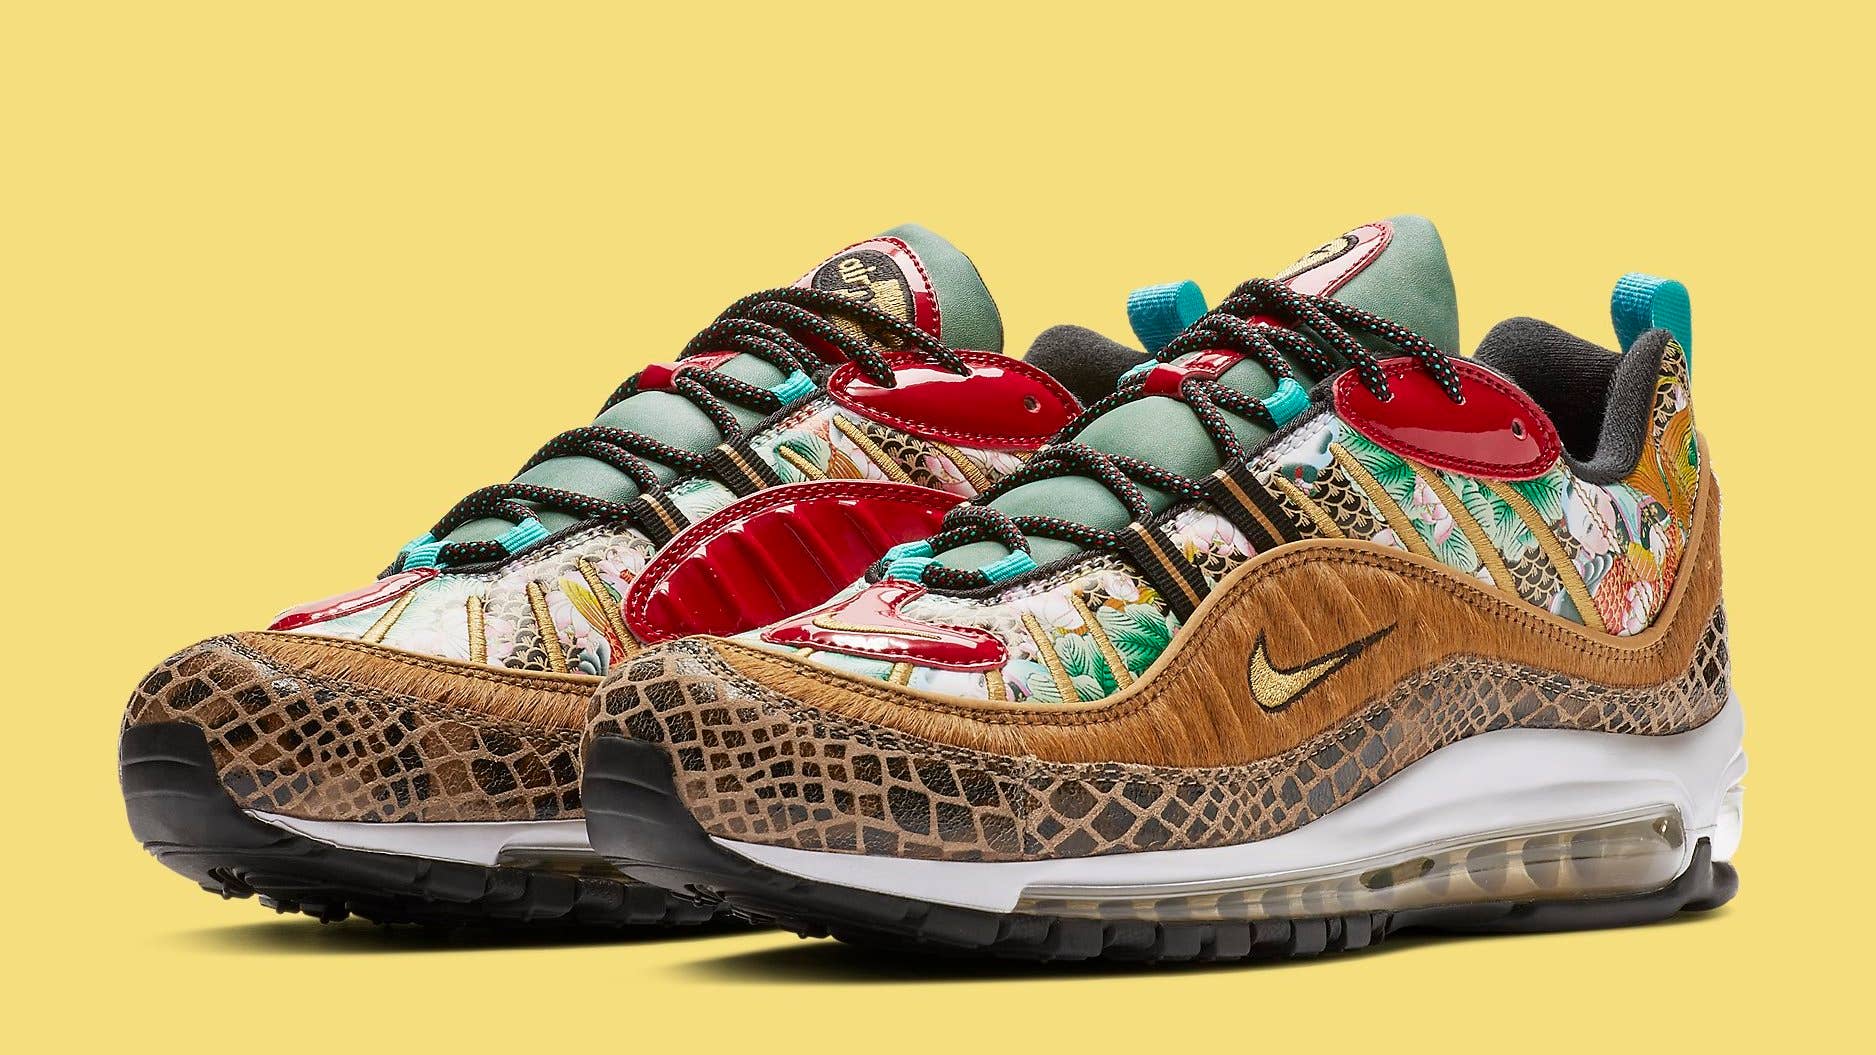 Is An Official Look The Nike Max 98s for Chinese New Year 2019 | Complex